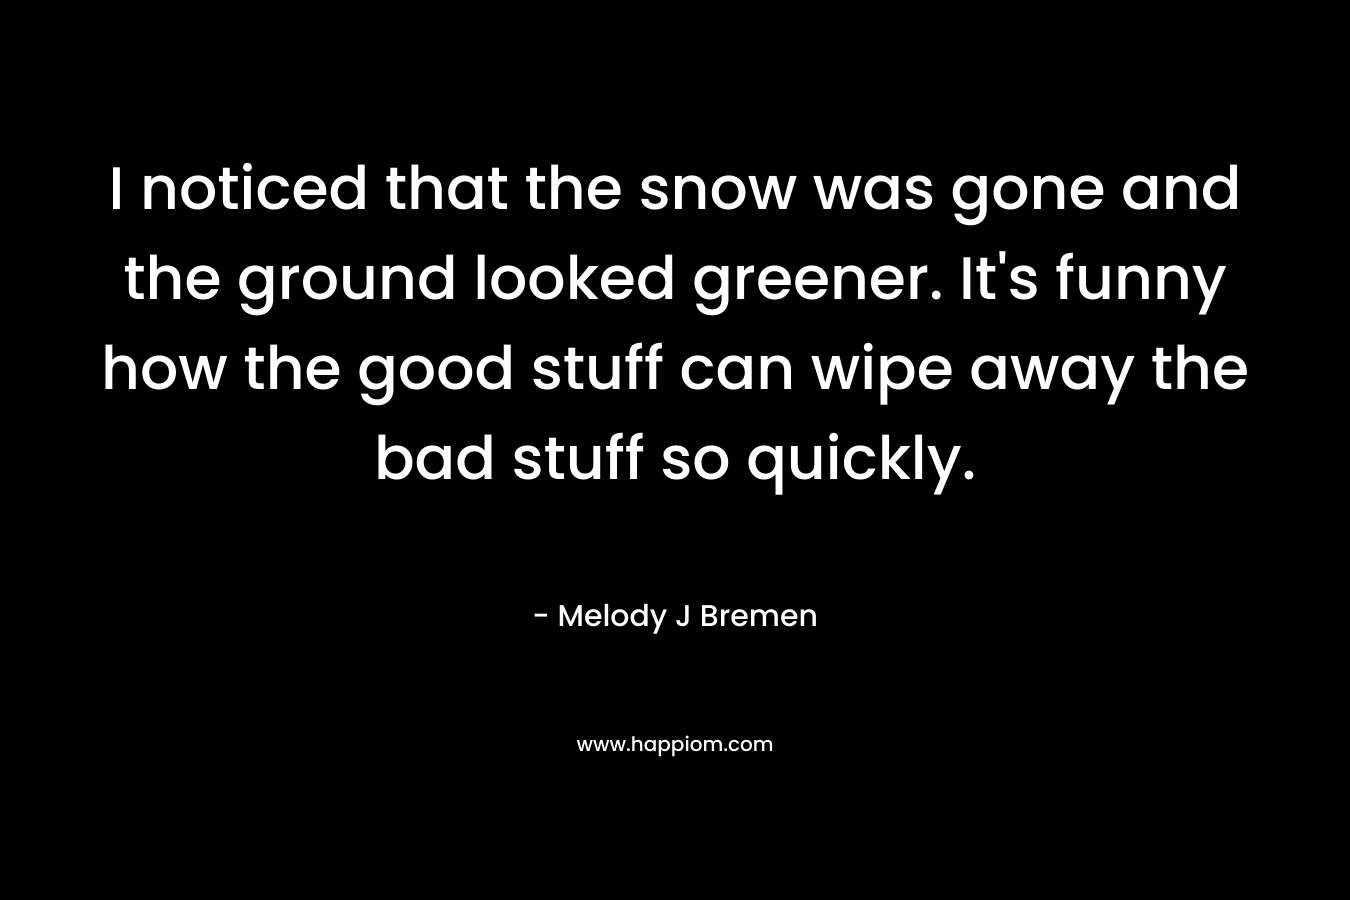 I noticed that the snow was gone and the ground looked greener. It’s funny how the good stuff can wipe away the bad stuff so quickly. – Melody J Bremen